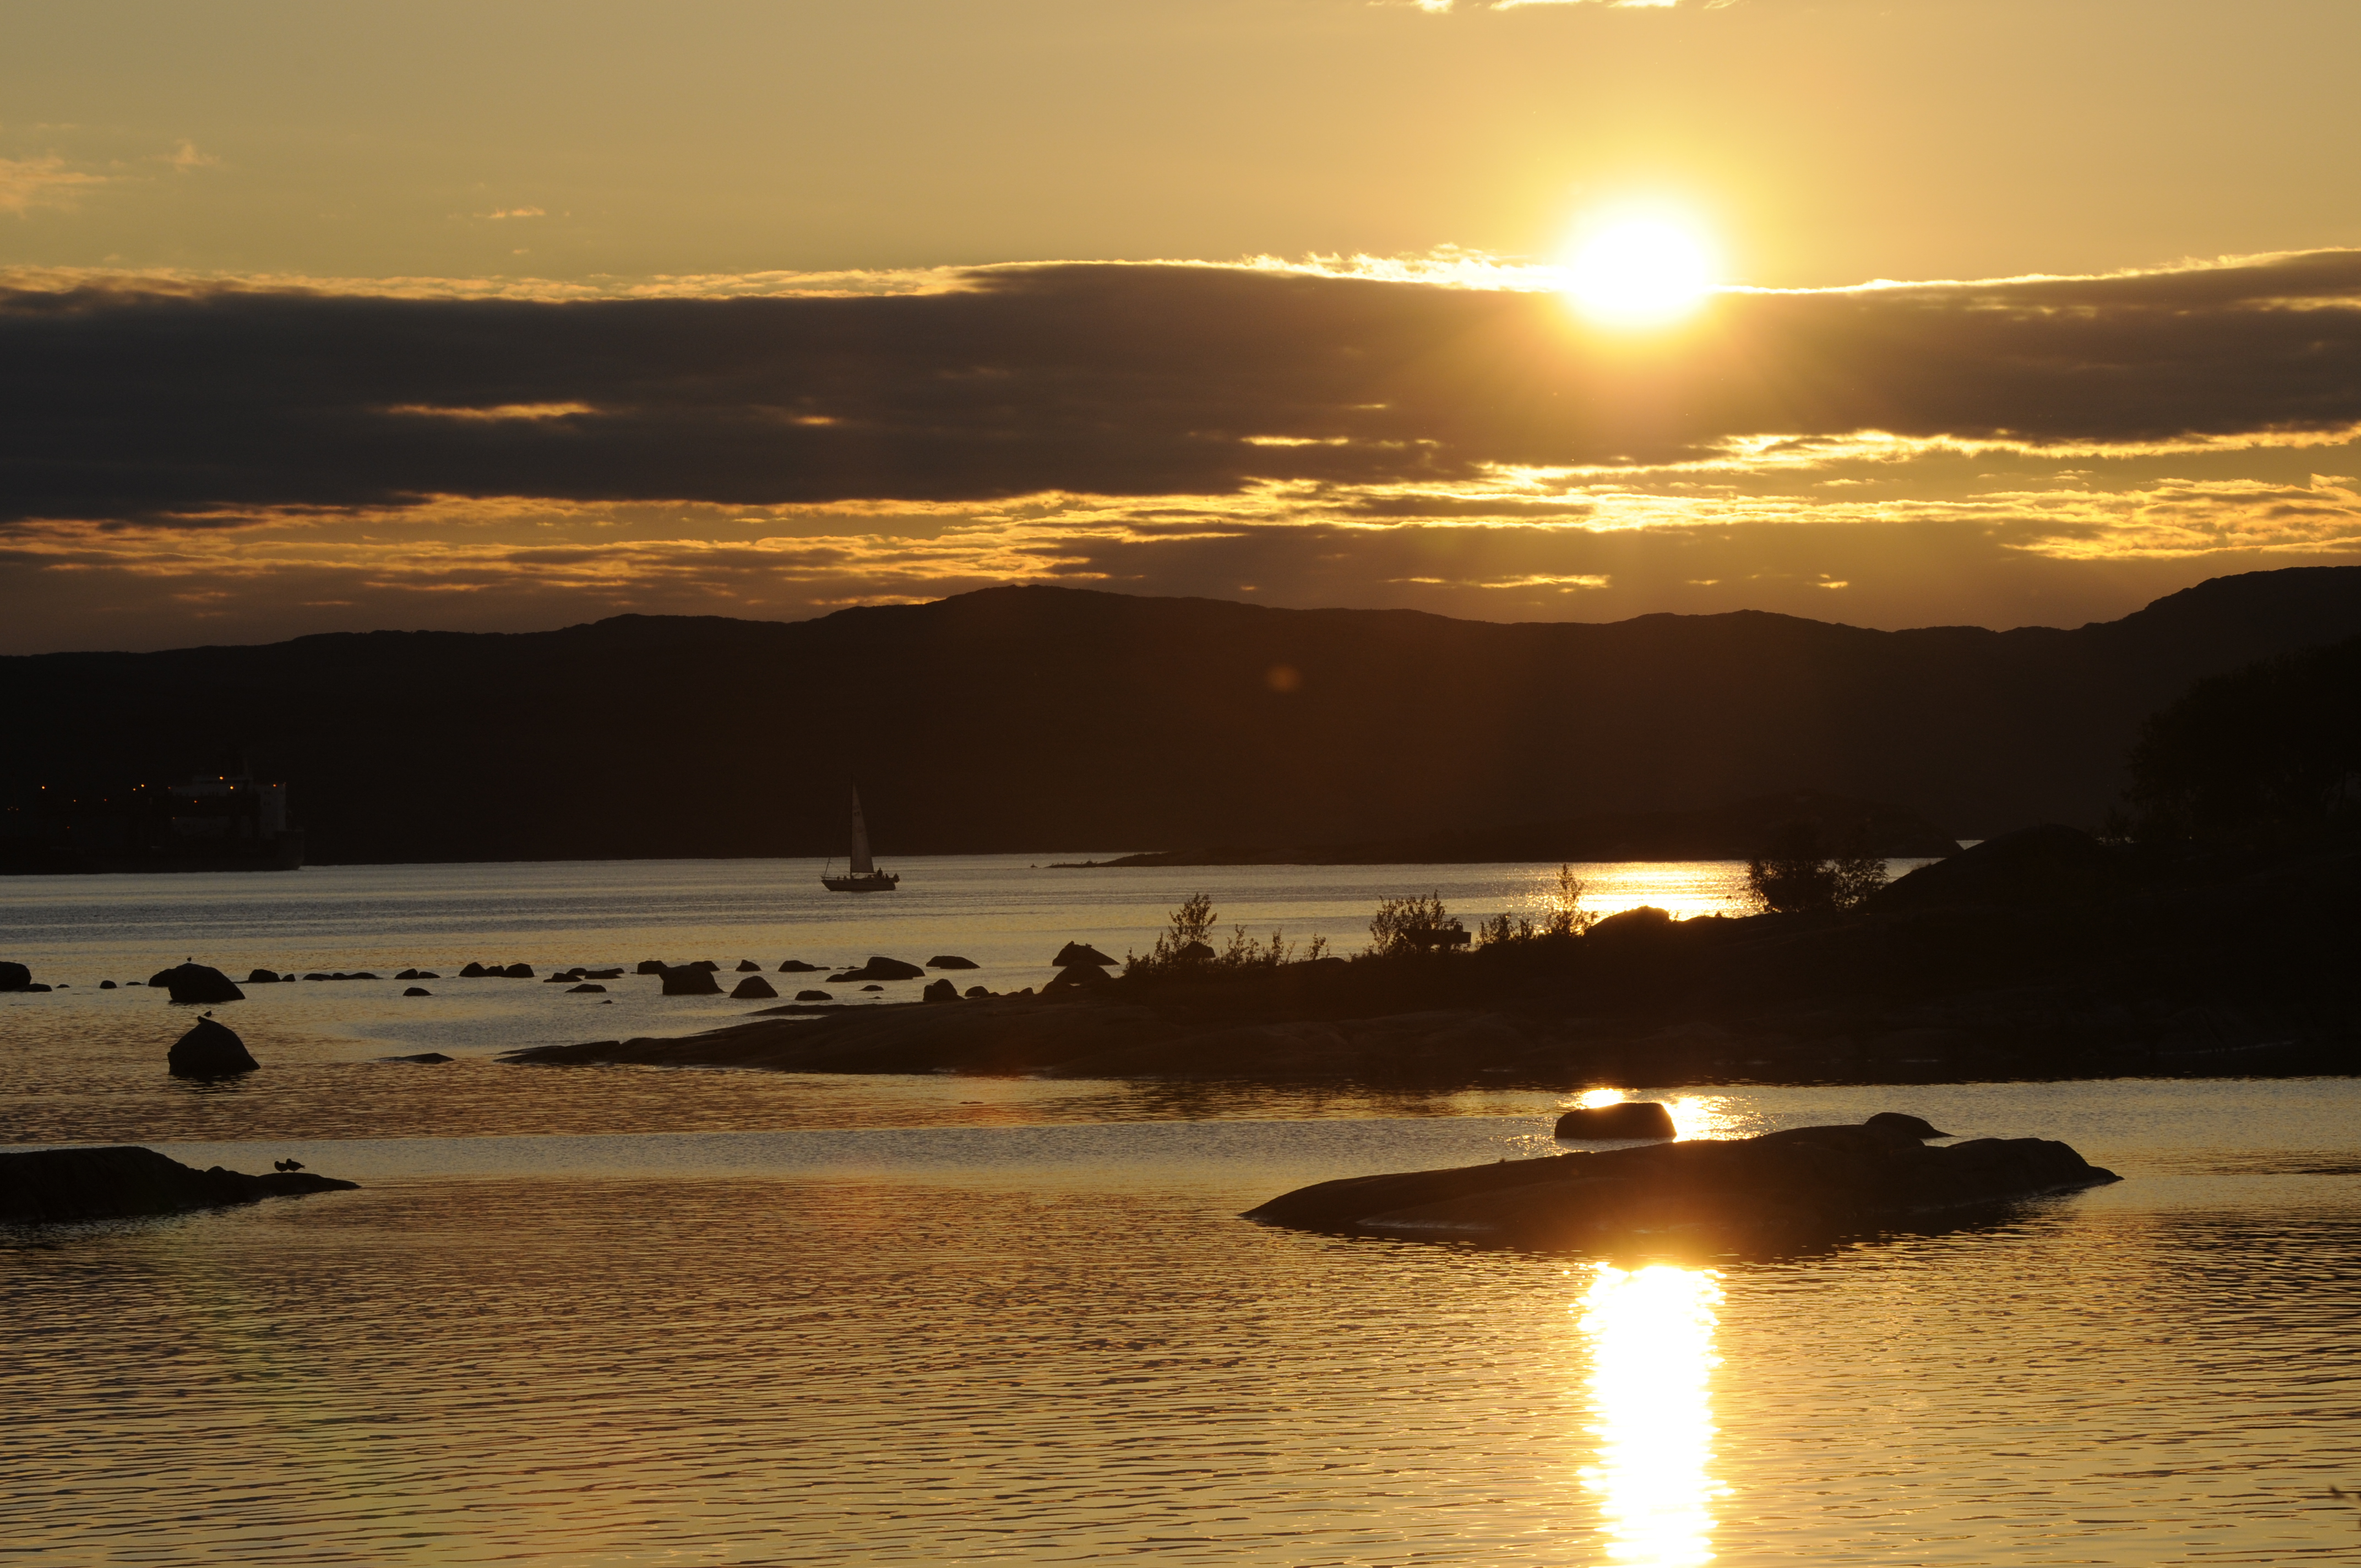 Global warming is producing longer summers in northern Norway - The Independent Barents Observer